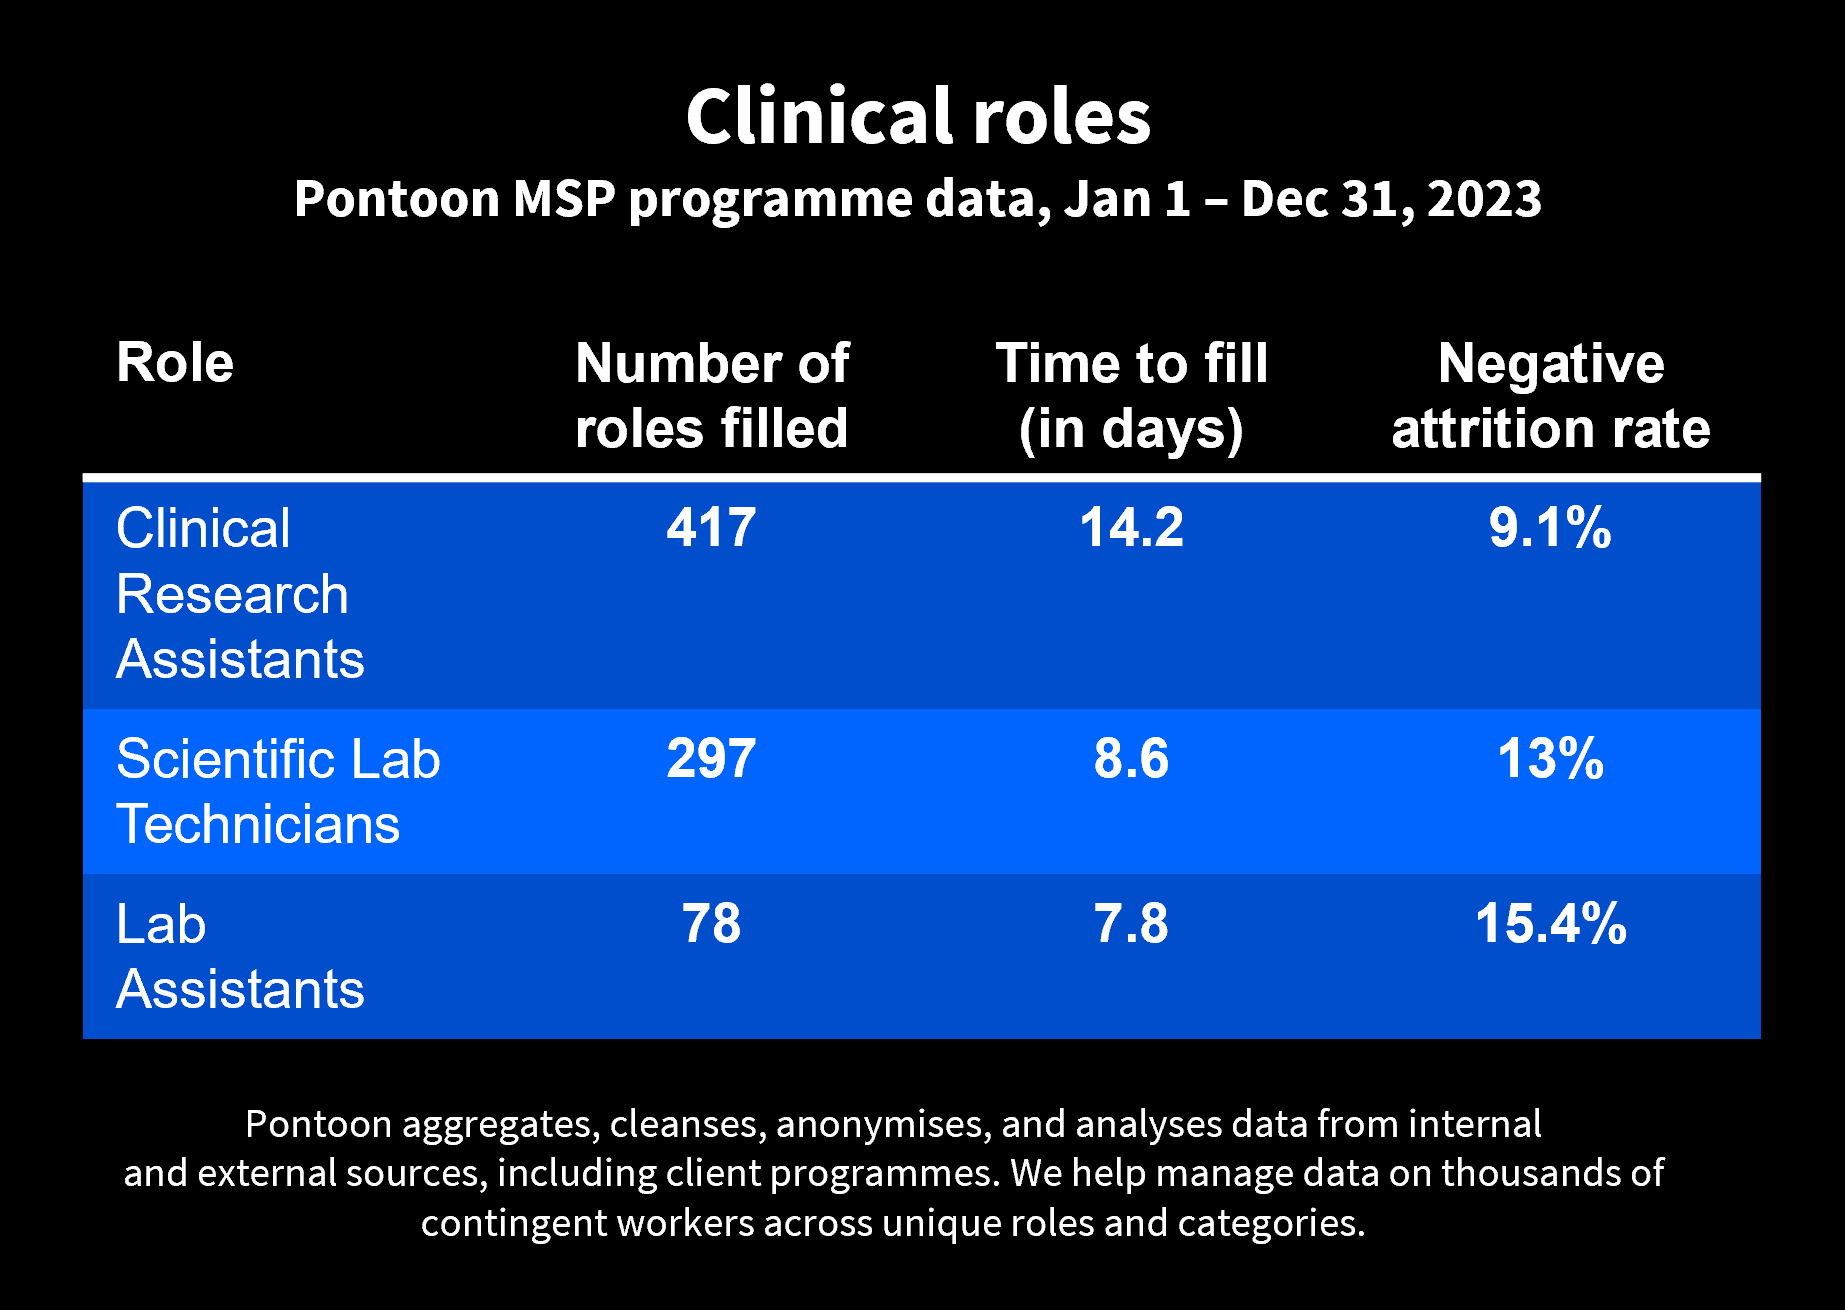 Pontoon's MSP programme data on clinical roles filled 2023